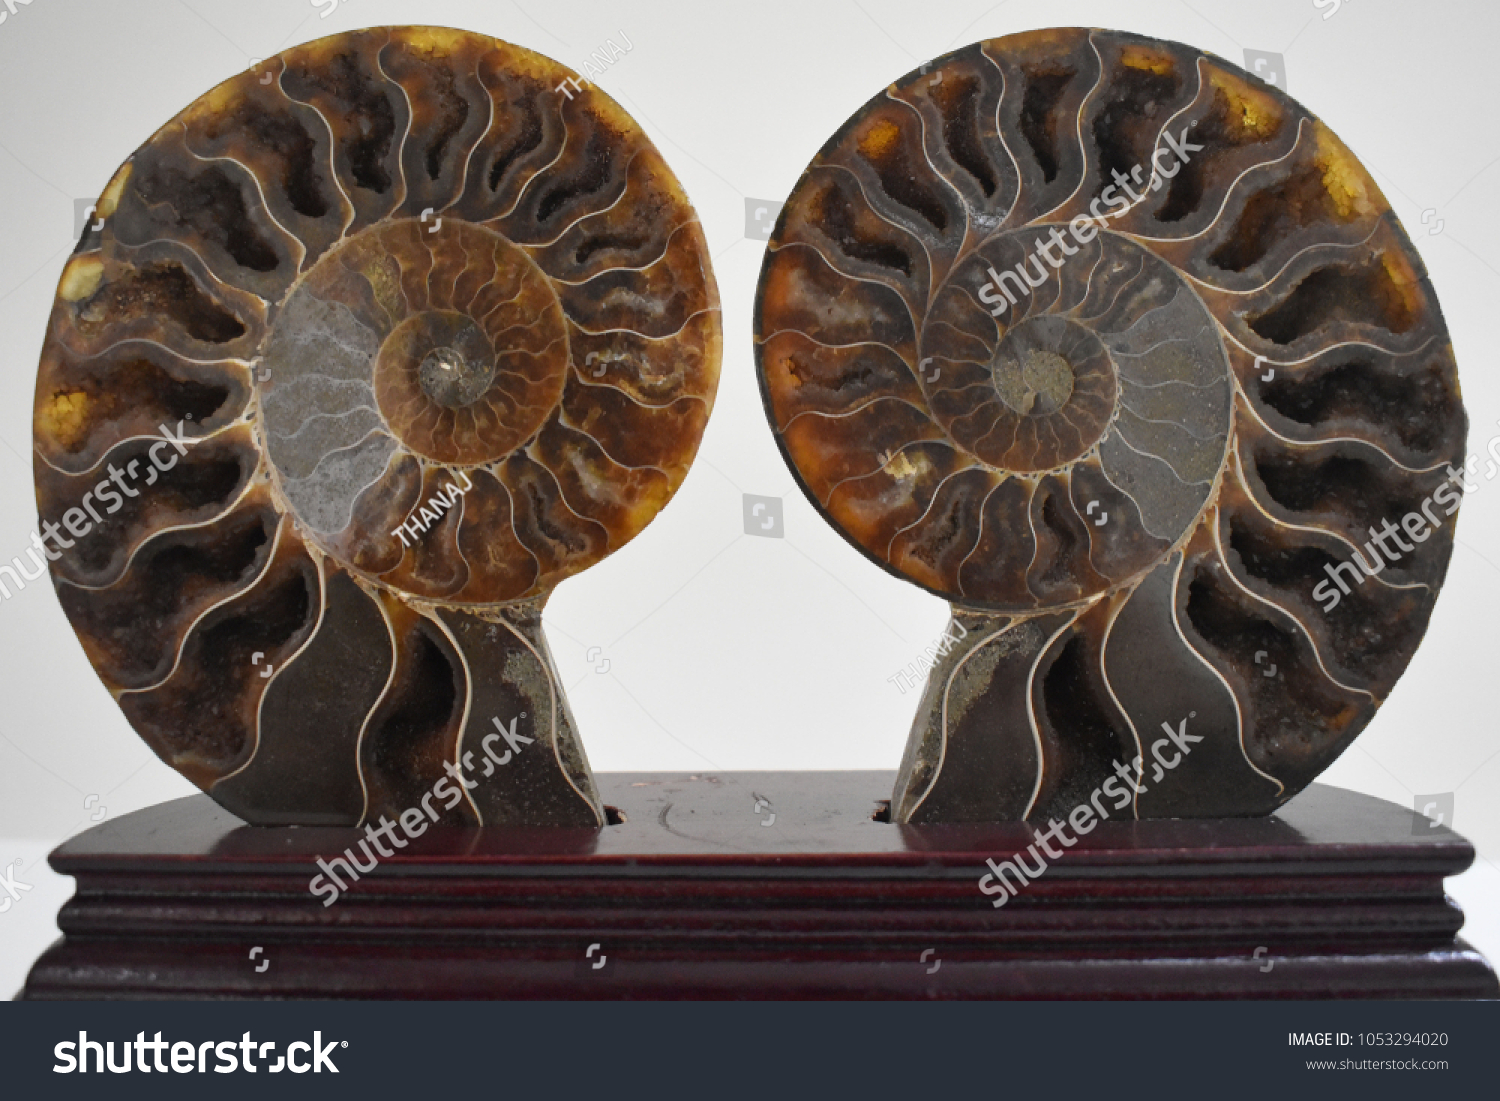 Nautilus Shell Fossil On Table Stock Photo Edit Now 1053294020